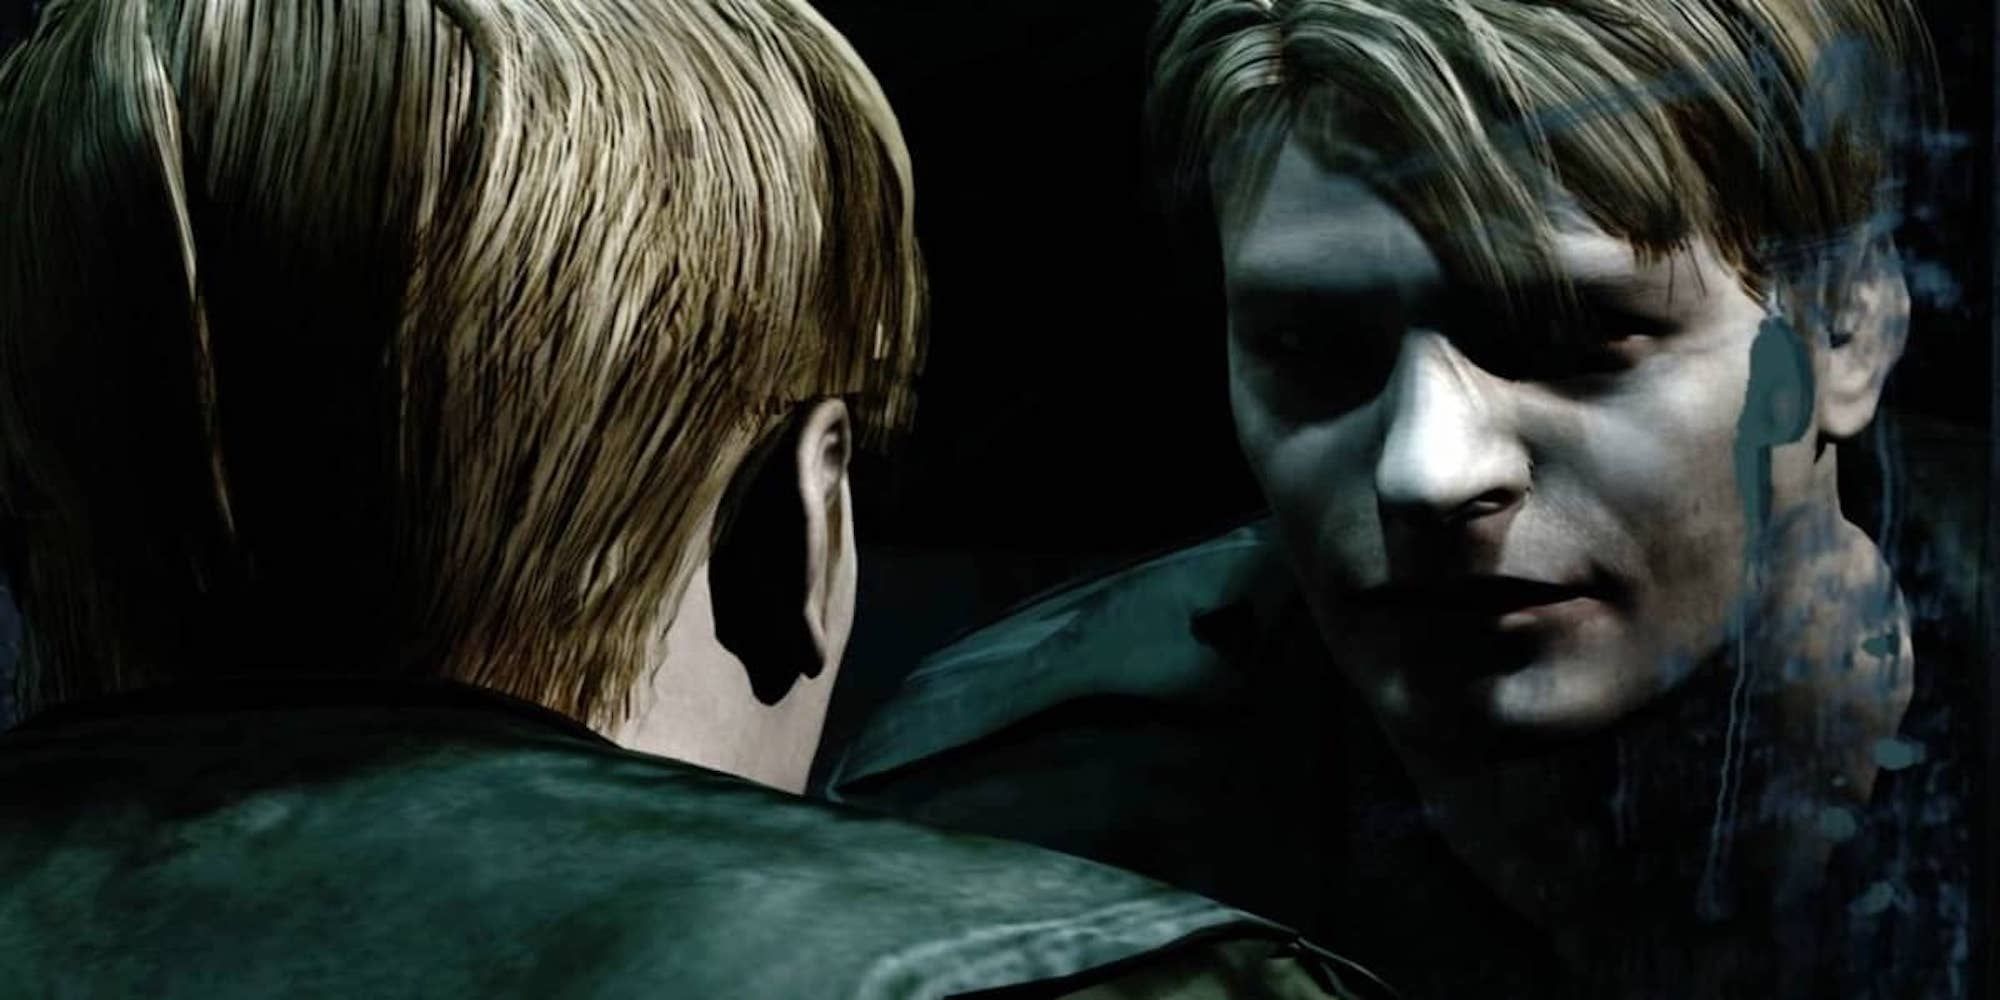 Silent Hill 2 movie casts James Sunderland and Maria actors - Polygon